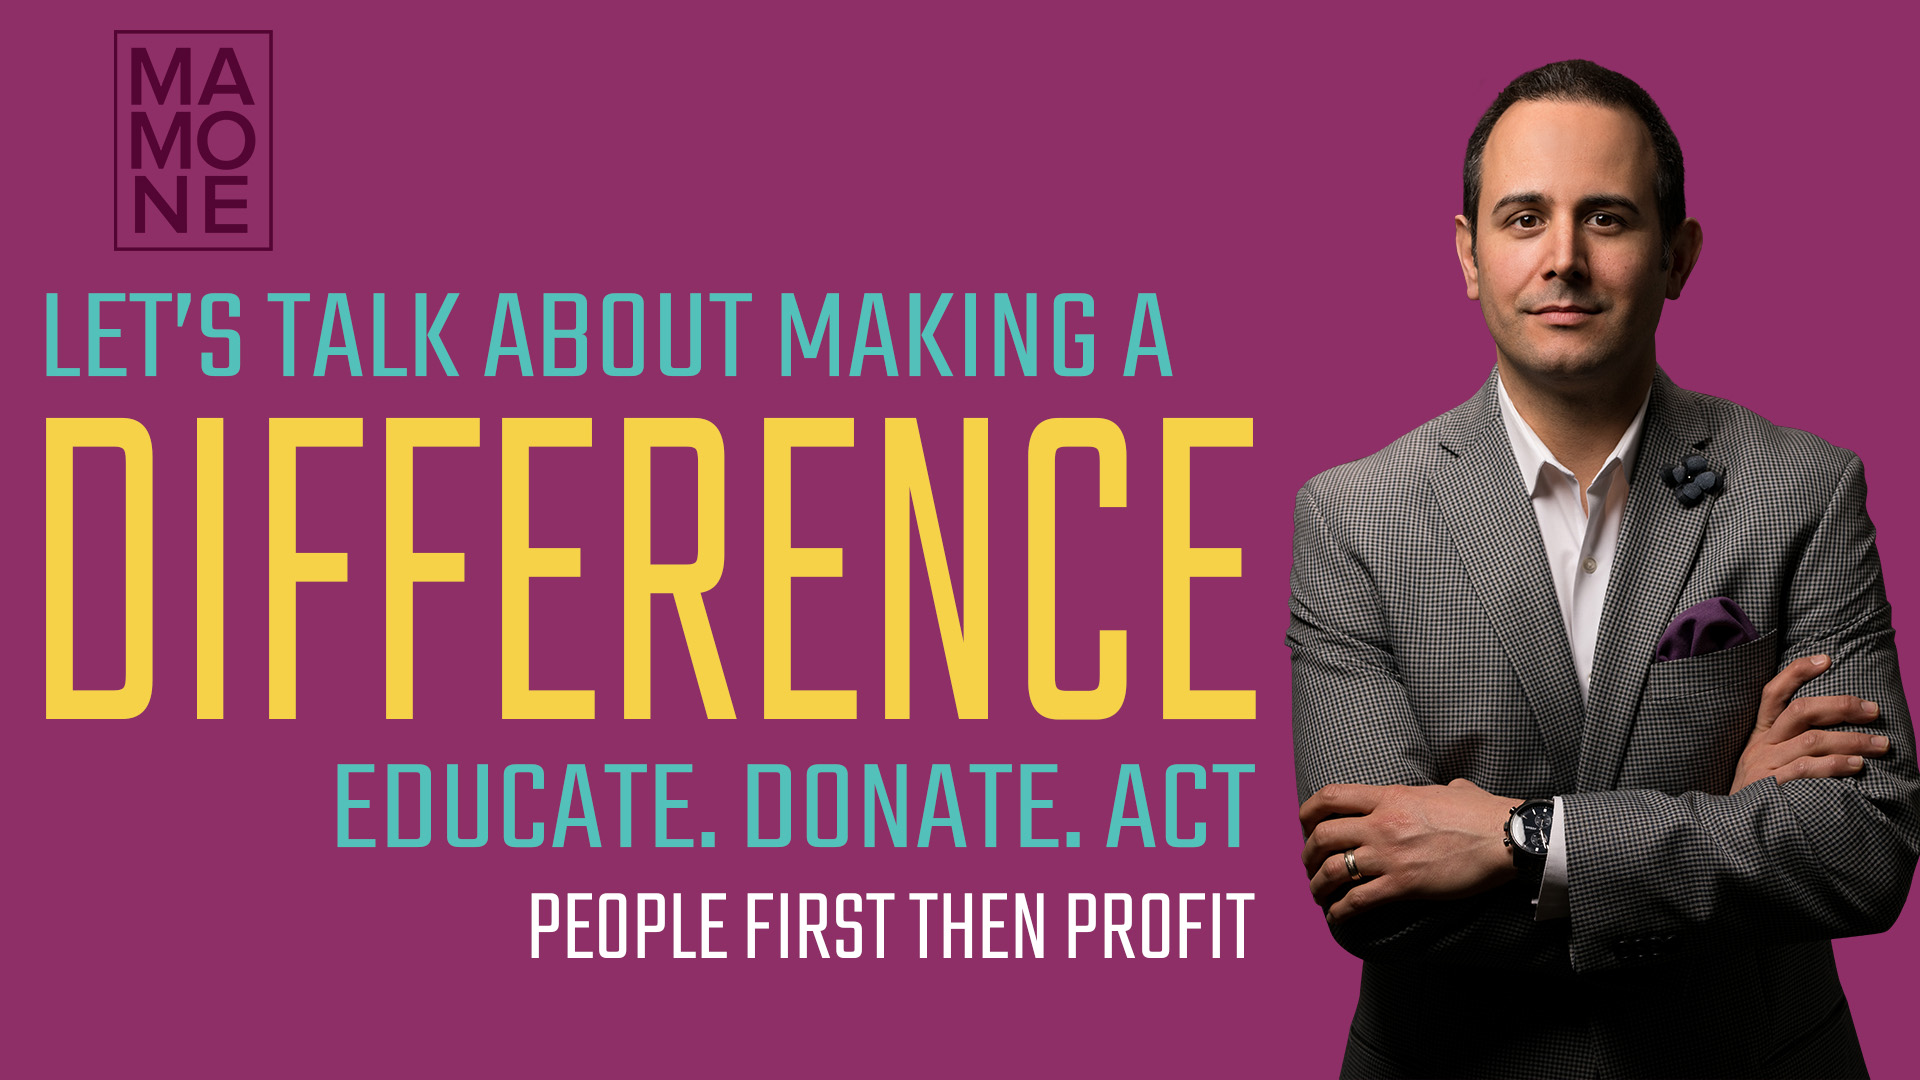 Let’s Talk About Making A Difference | Educate. Donate Act.